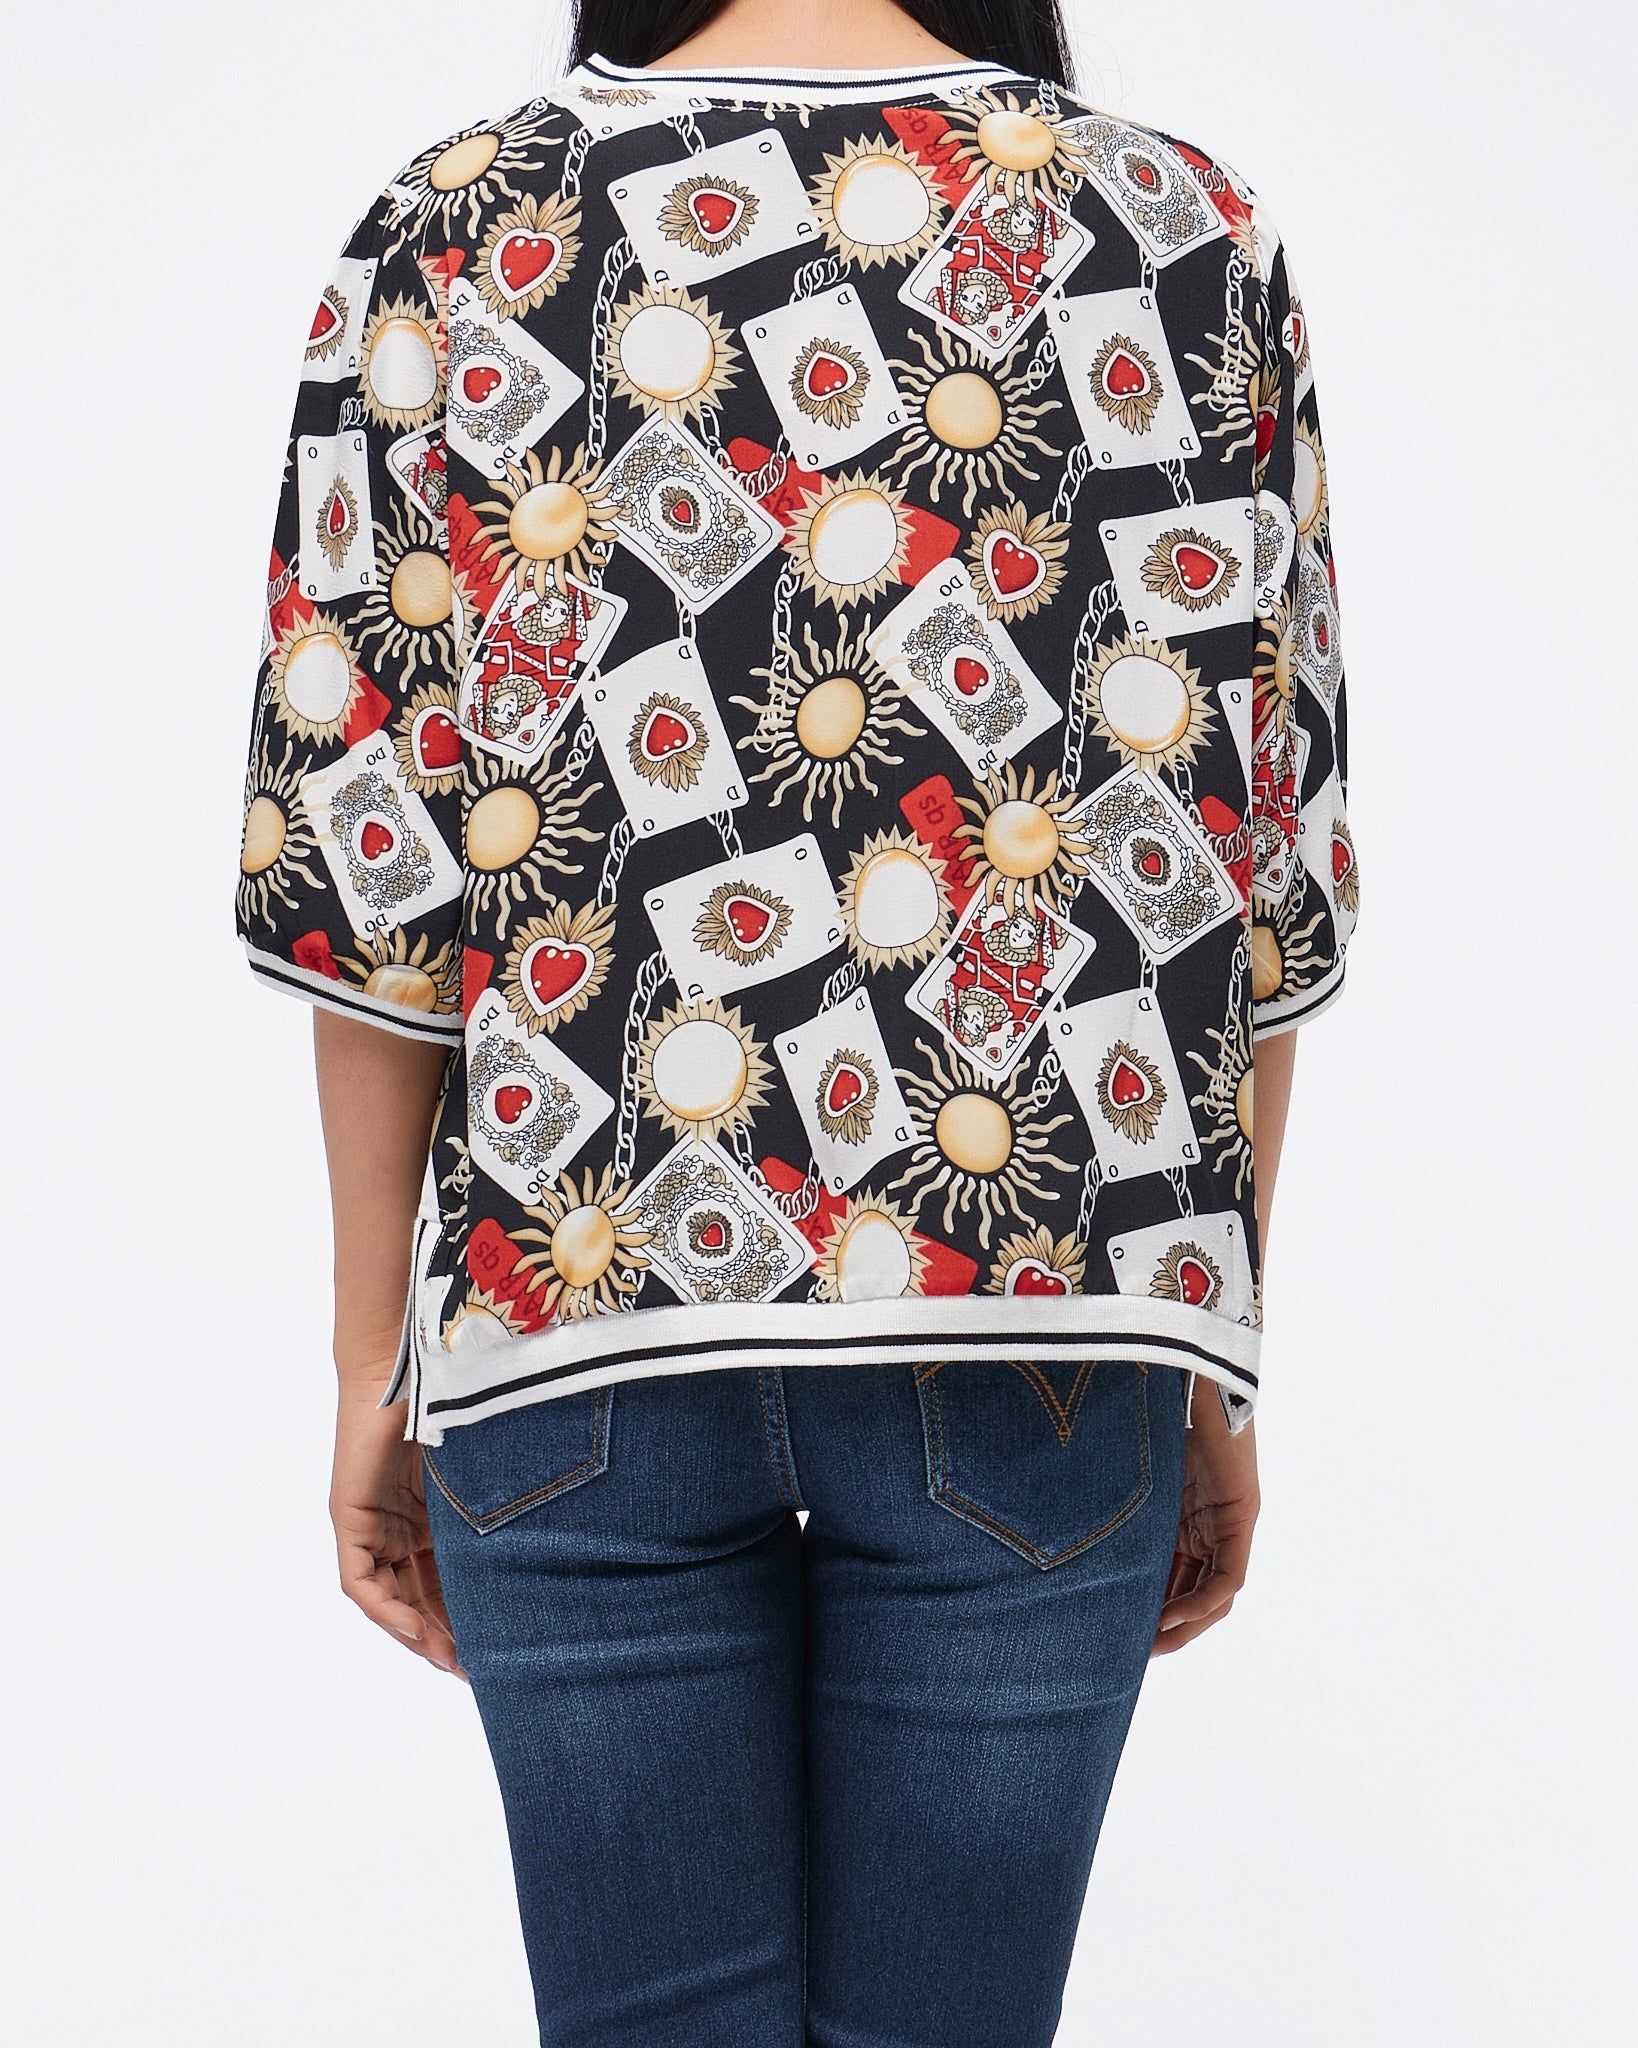 MOI OUTFIT-Playing Card Printed Lady Crop Top 15.90